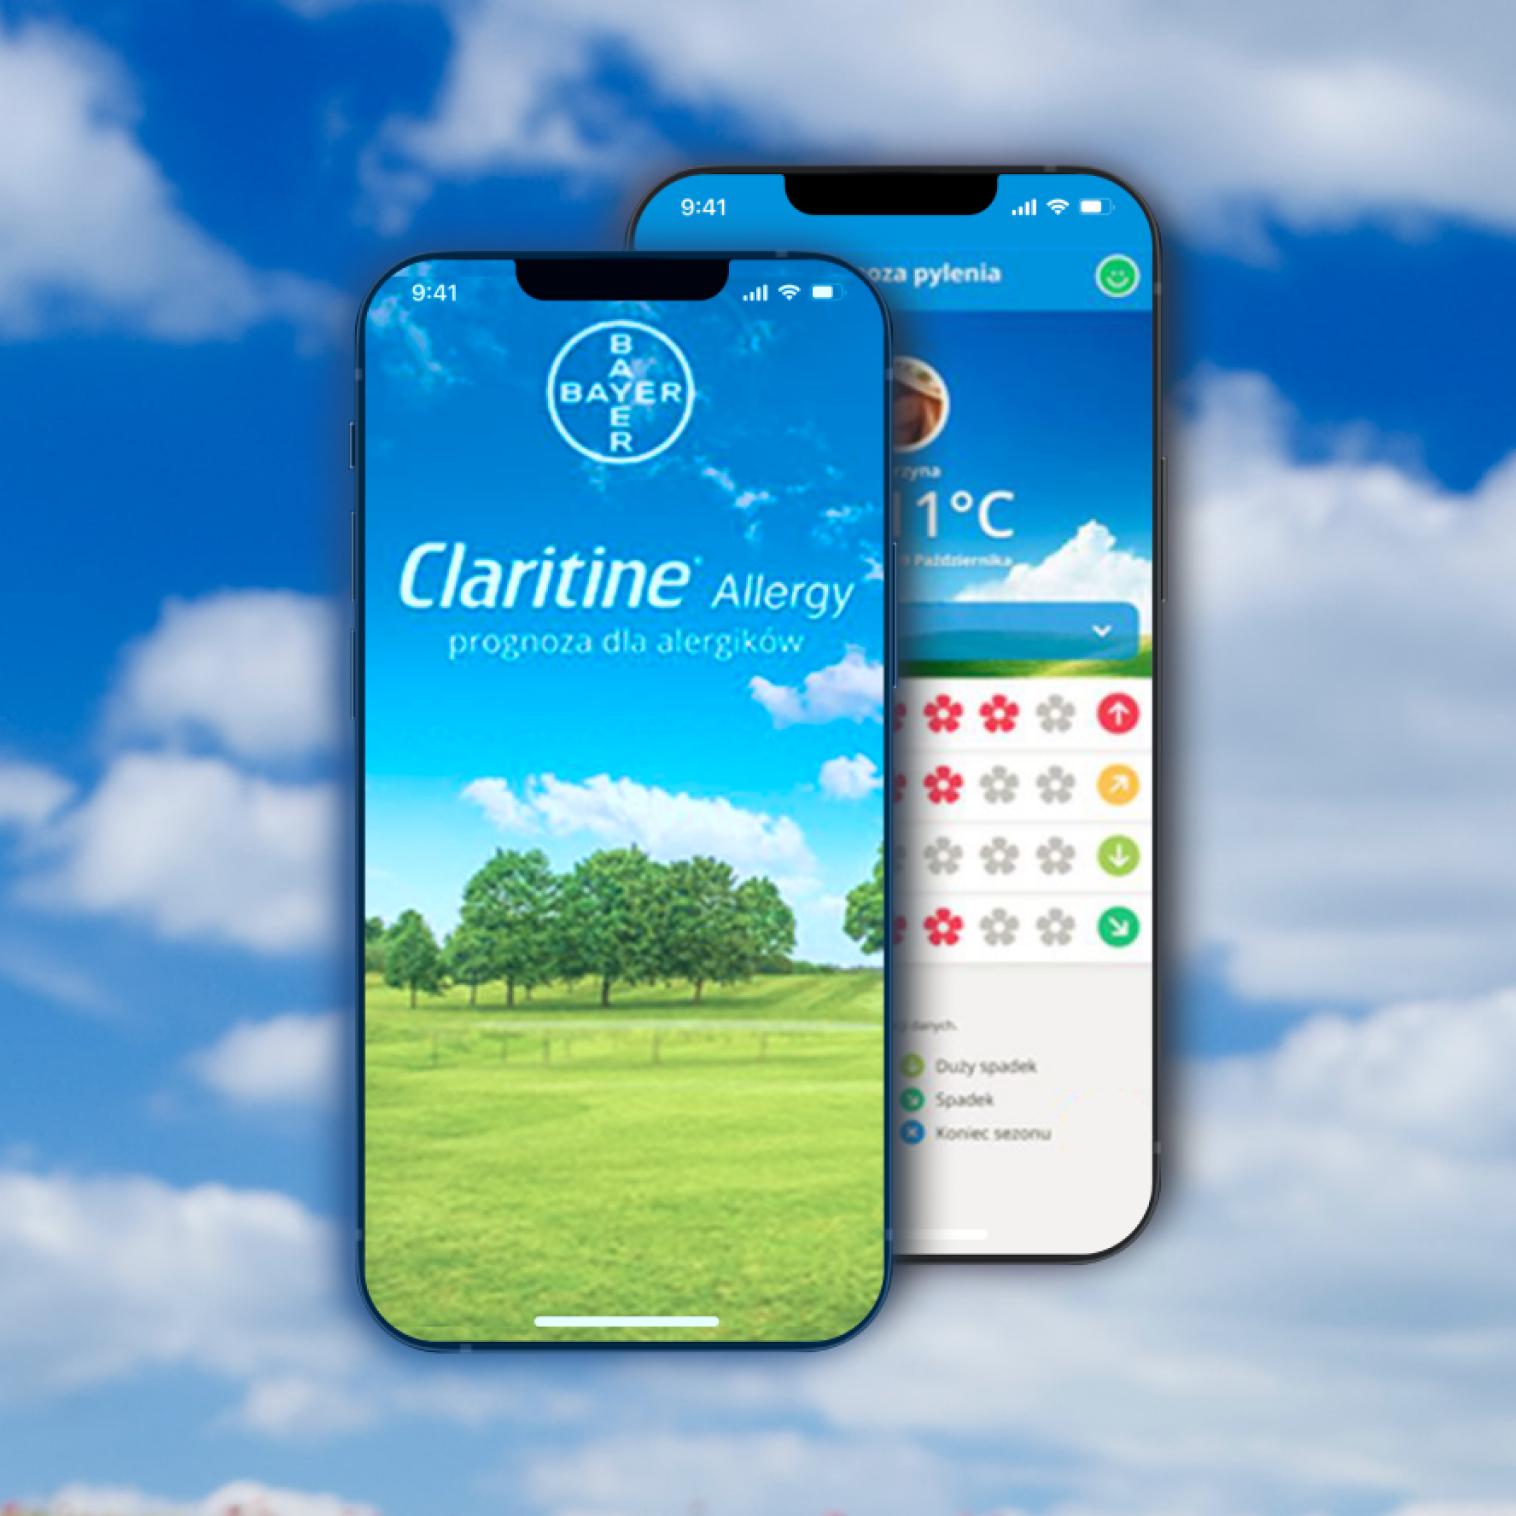 two levitating screens of claritine app in the summer sky, one screen shows the start page of the app, the second screen shows the strength of different allergens for the selected location